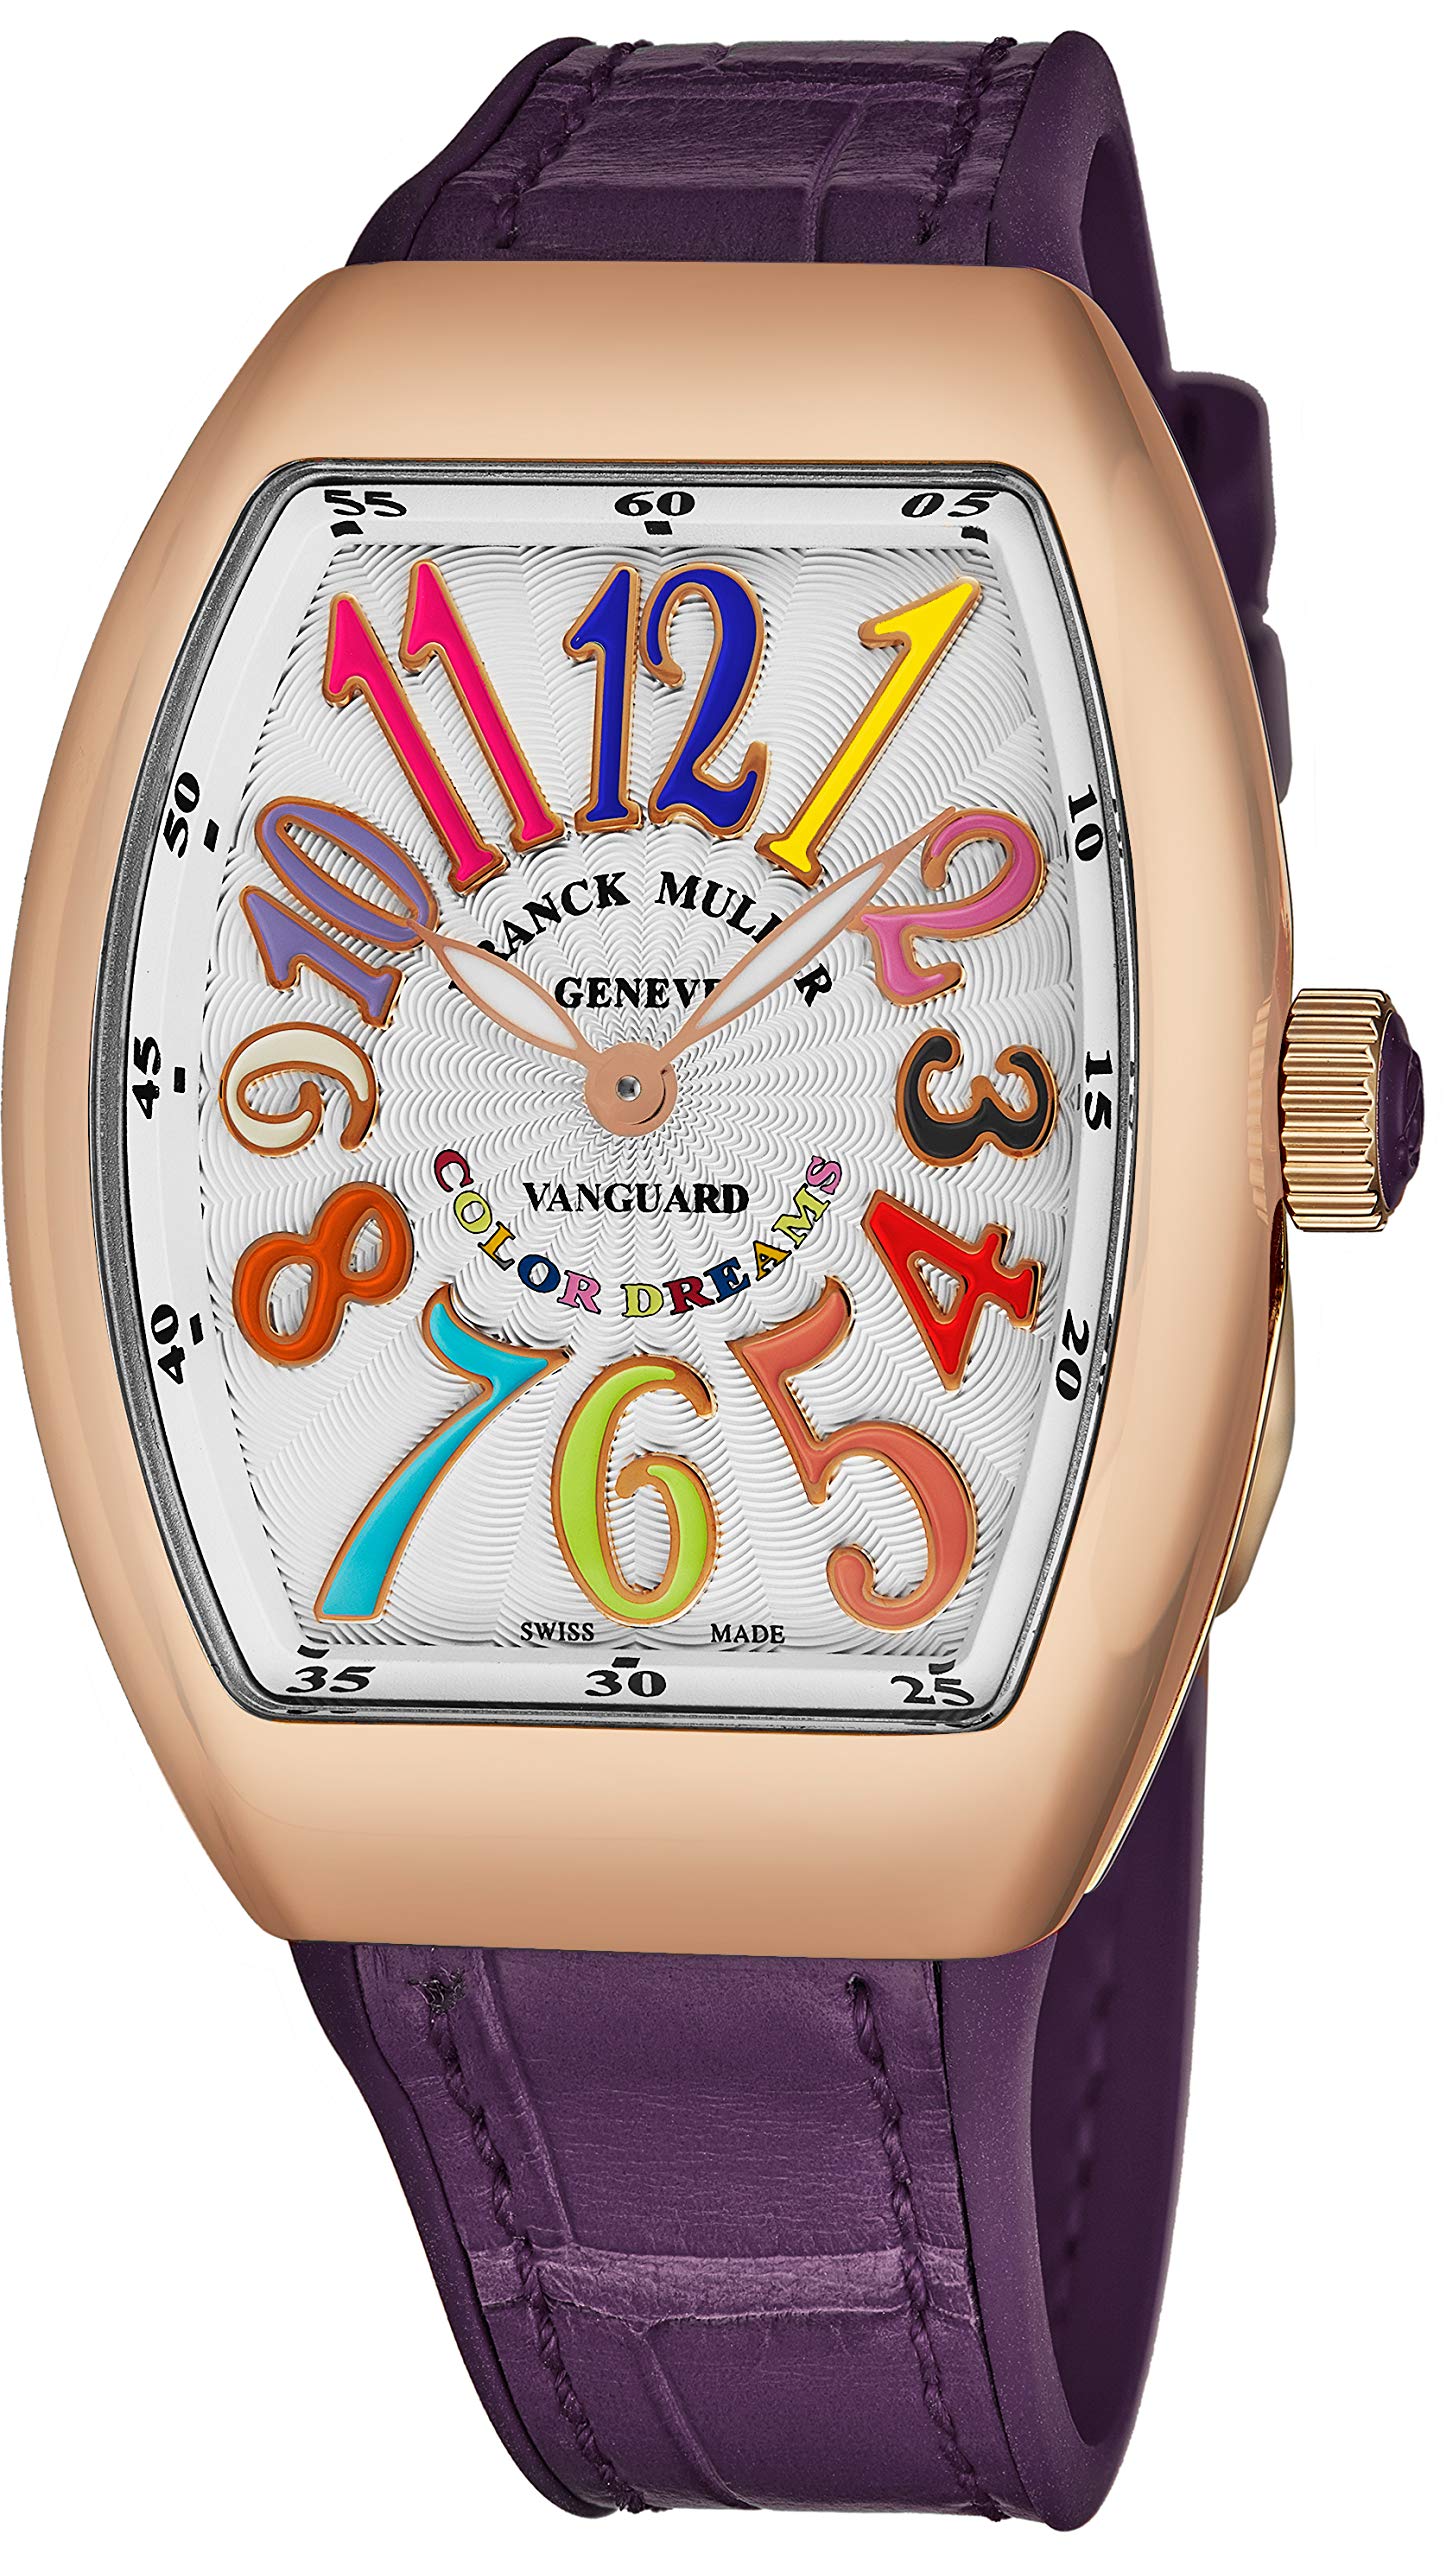 Franck Muller Vanguard Color Dreams Womens 18K Rose Gold Swiss Quartz Watch Tonneau Silver Face with Luminous Hands and Sapphire Crystal Purple Leather/Rubber Strap Ladies Watch V 32 SC at FO COL DRM